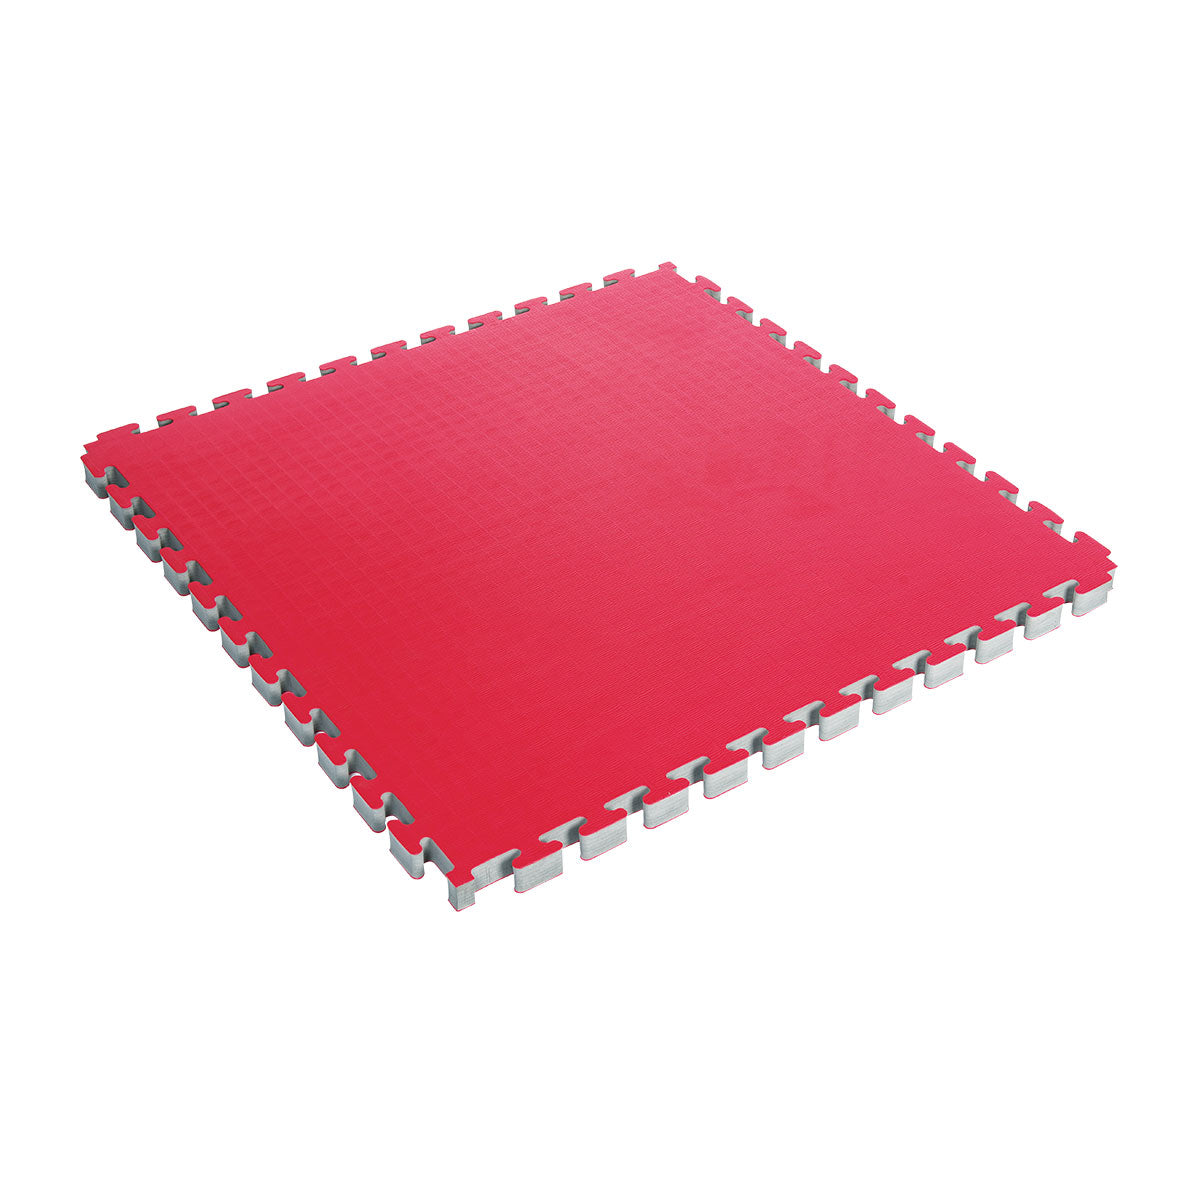 Reversible 1-1/2" Thick Puzzle Mat 1.5" Red Black